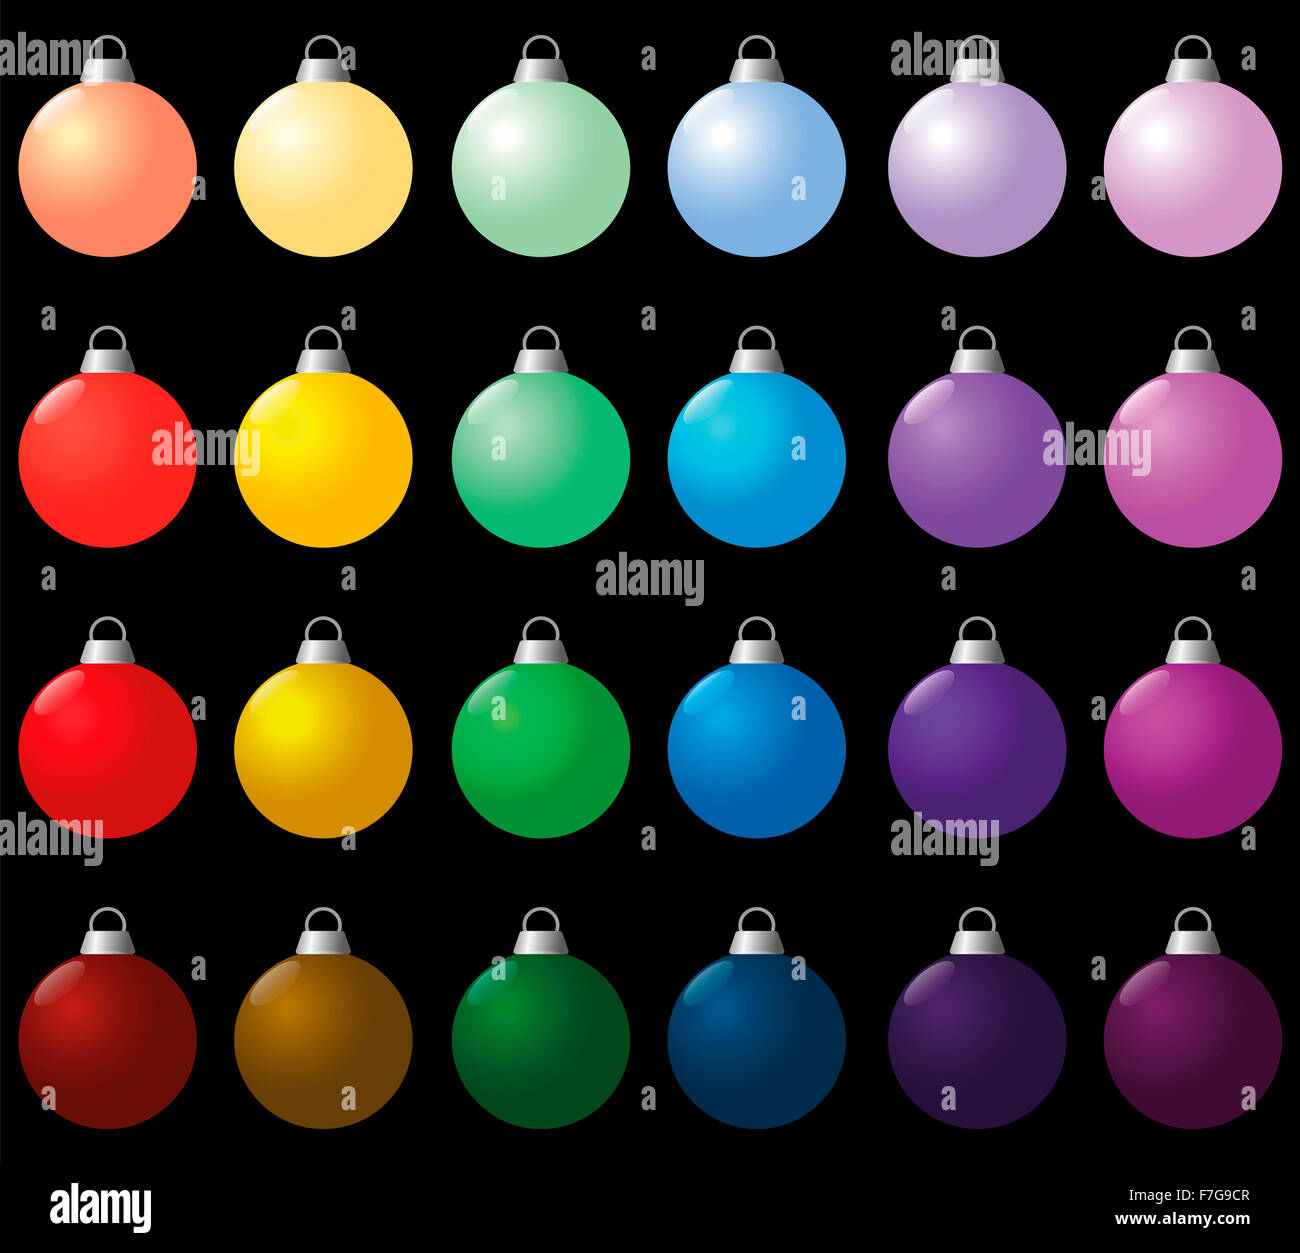 Colorful christmas balls. Seamless background can be created. Illustration over black. Stock Photo